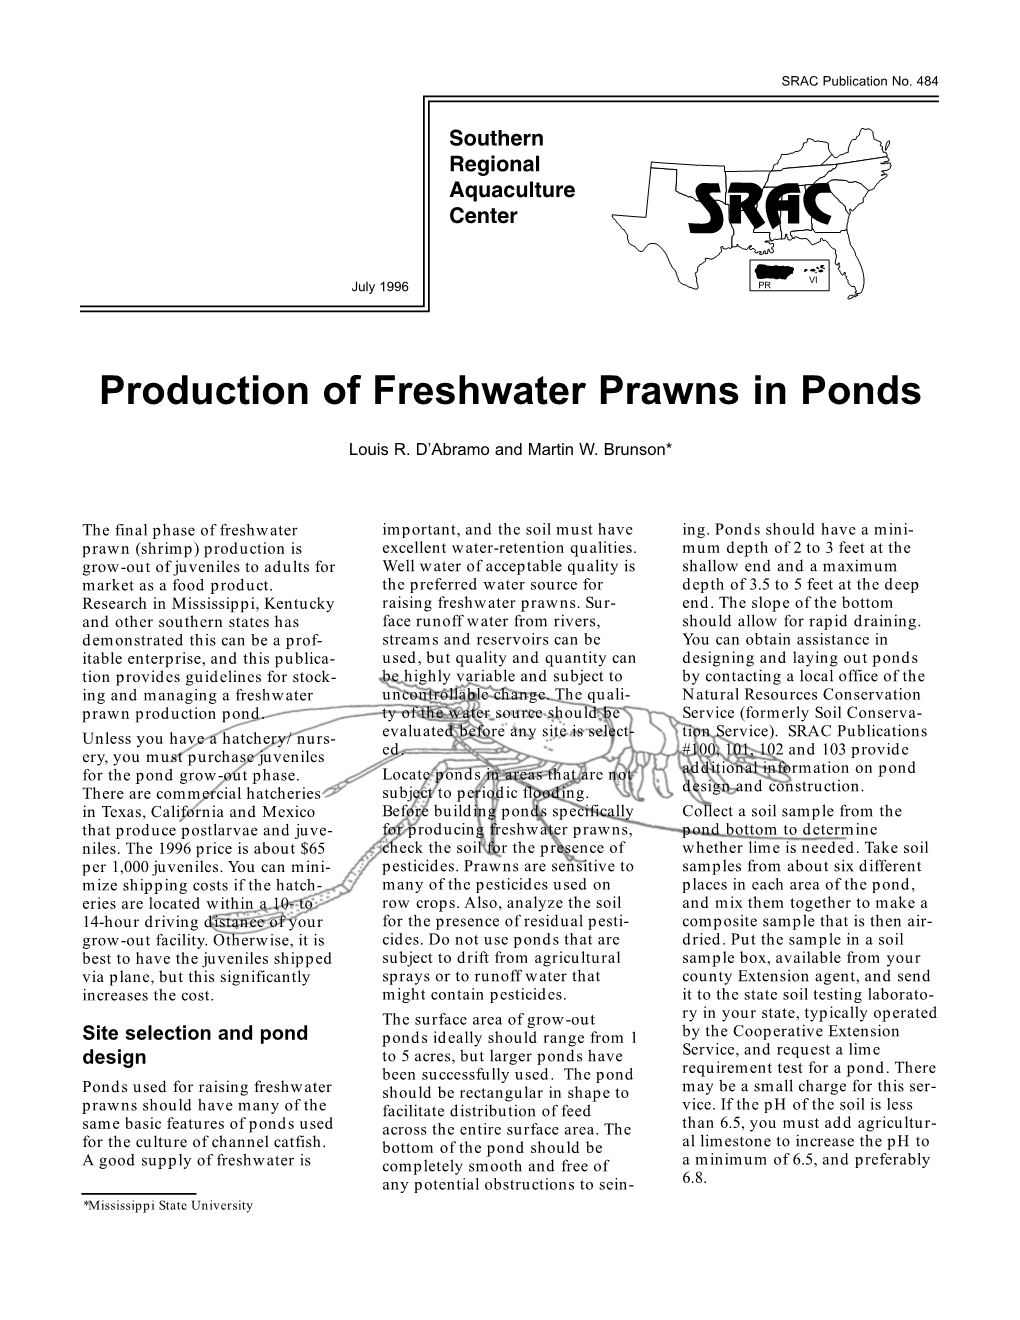 Production of Freshwater Prawns in Ponds